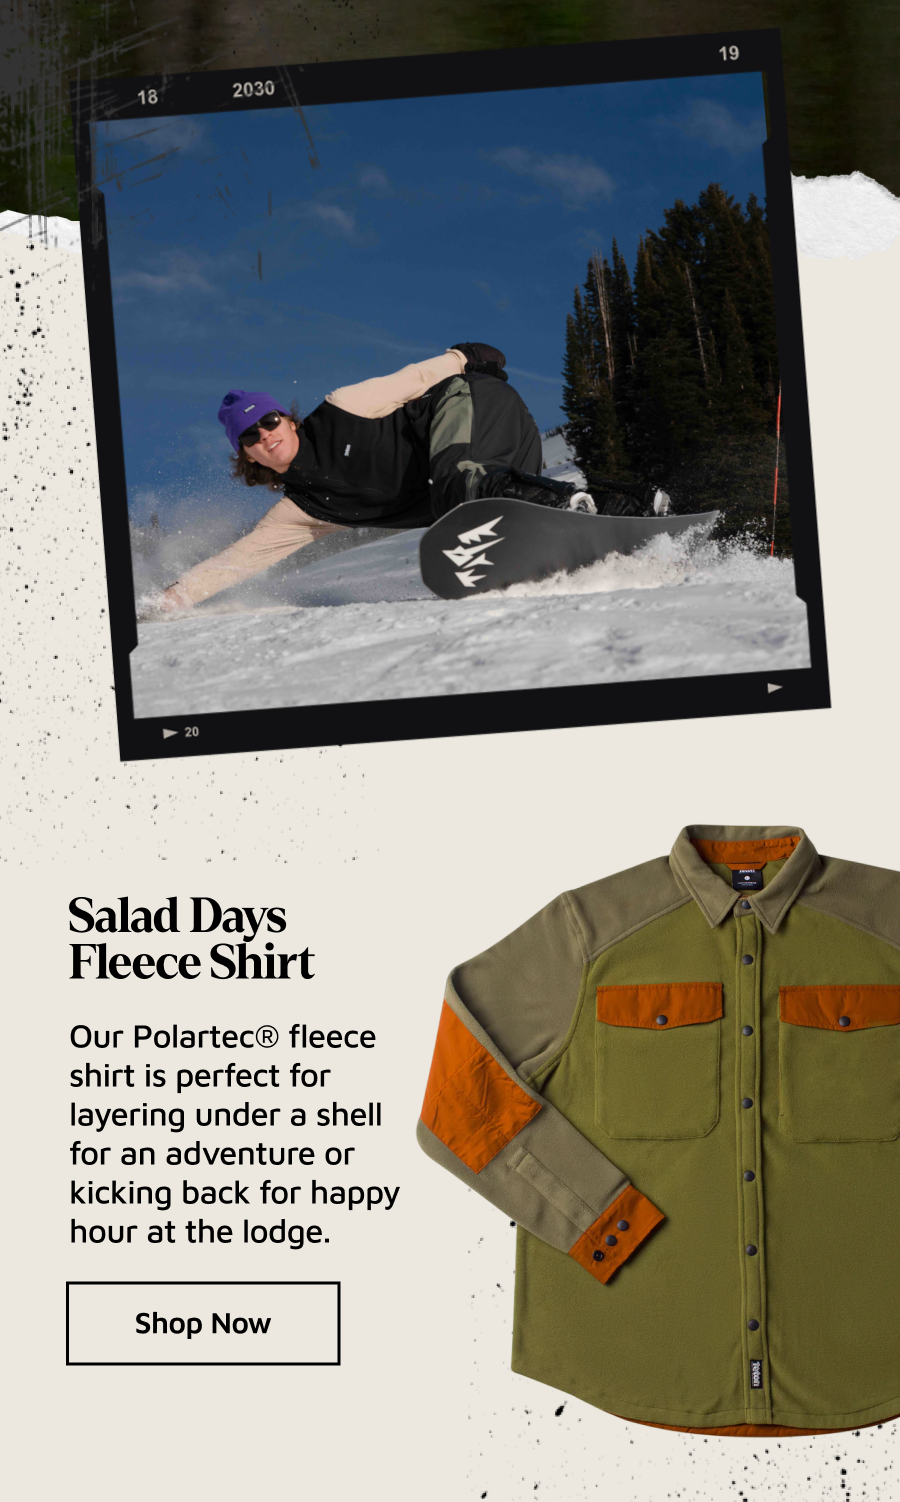 Salad Days Fleece Shirt. Our Polartec® fleece shirt is perfect for layering under a shell for an adventure or kicking back for happy hour at the lodge.